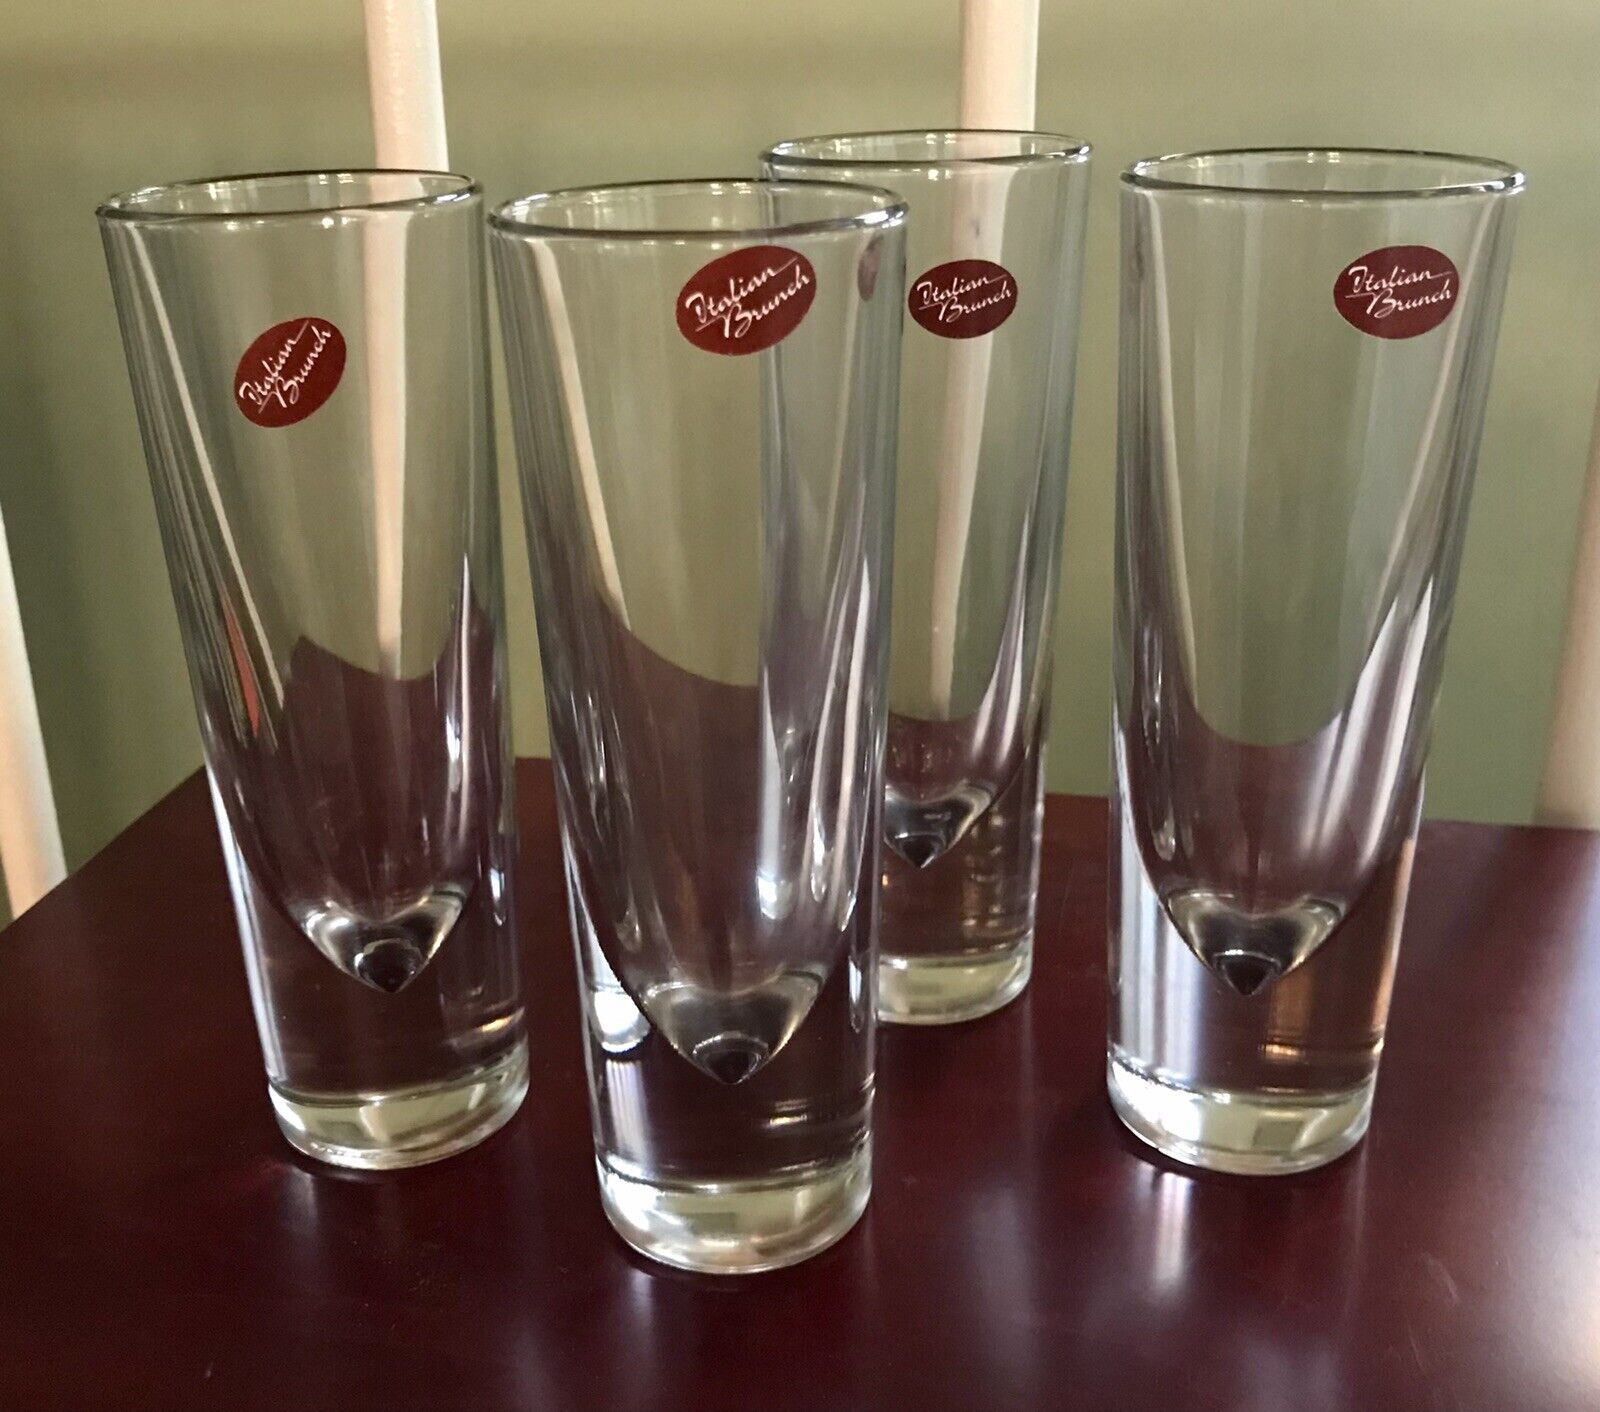 4 NEW Beautiful Gumps ITALIAN BRUNCH Bullet Tall Heavy 7” Glasses -Made in Italy